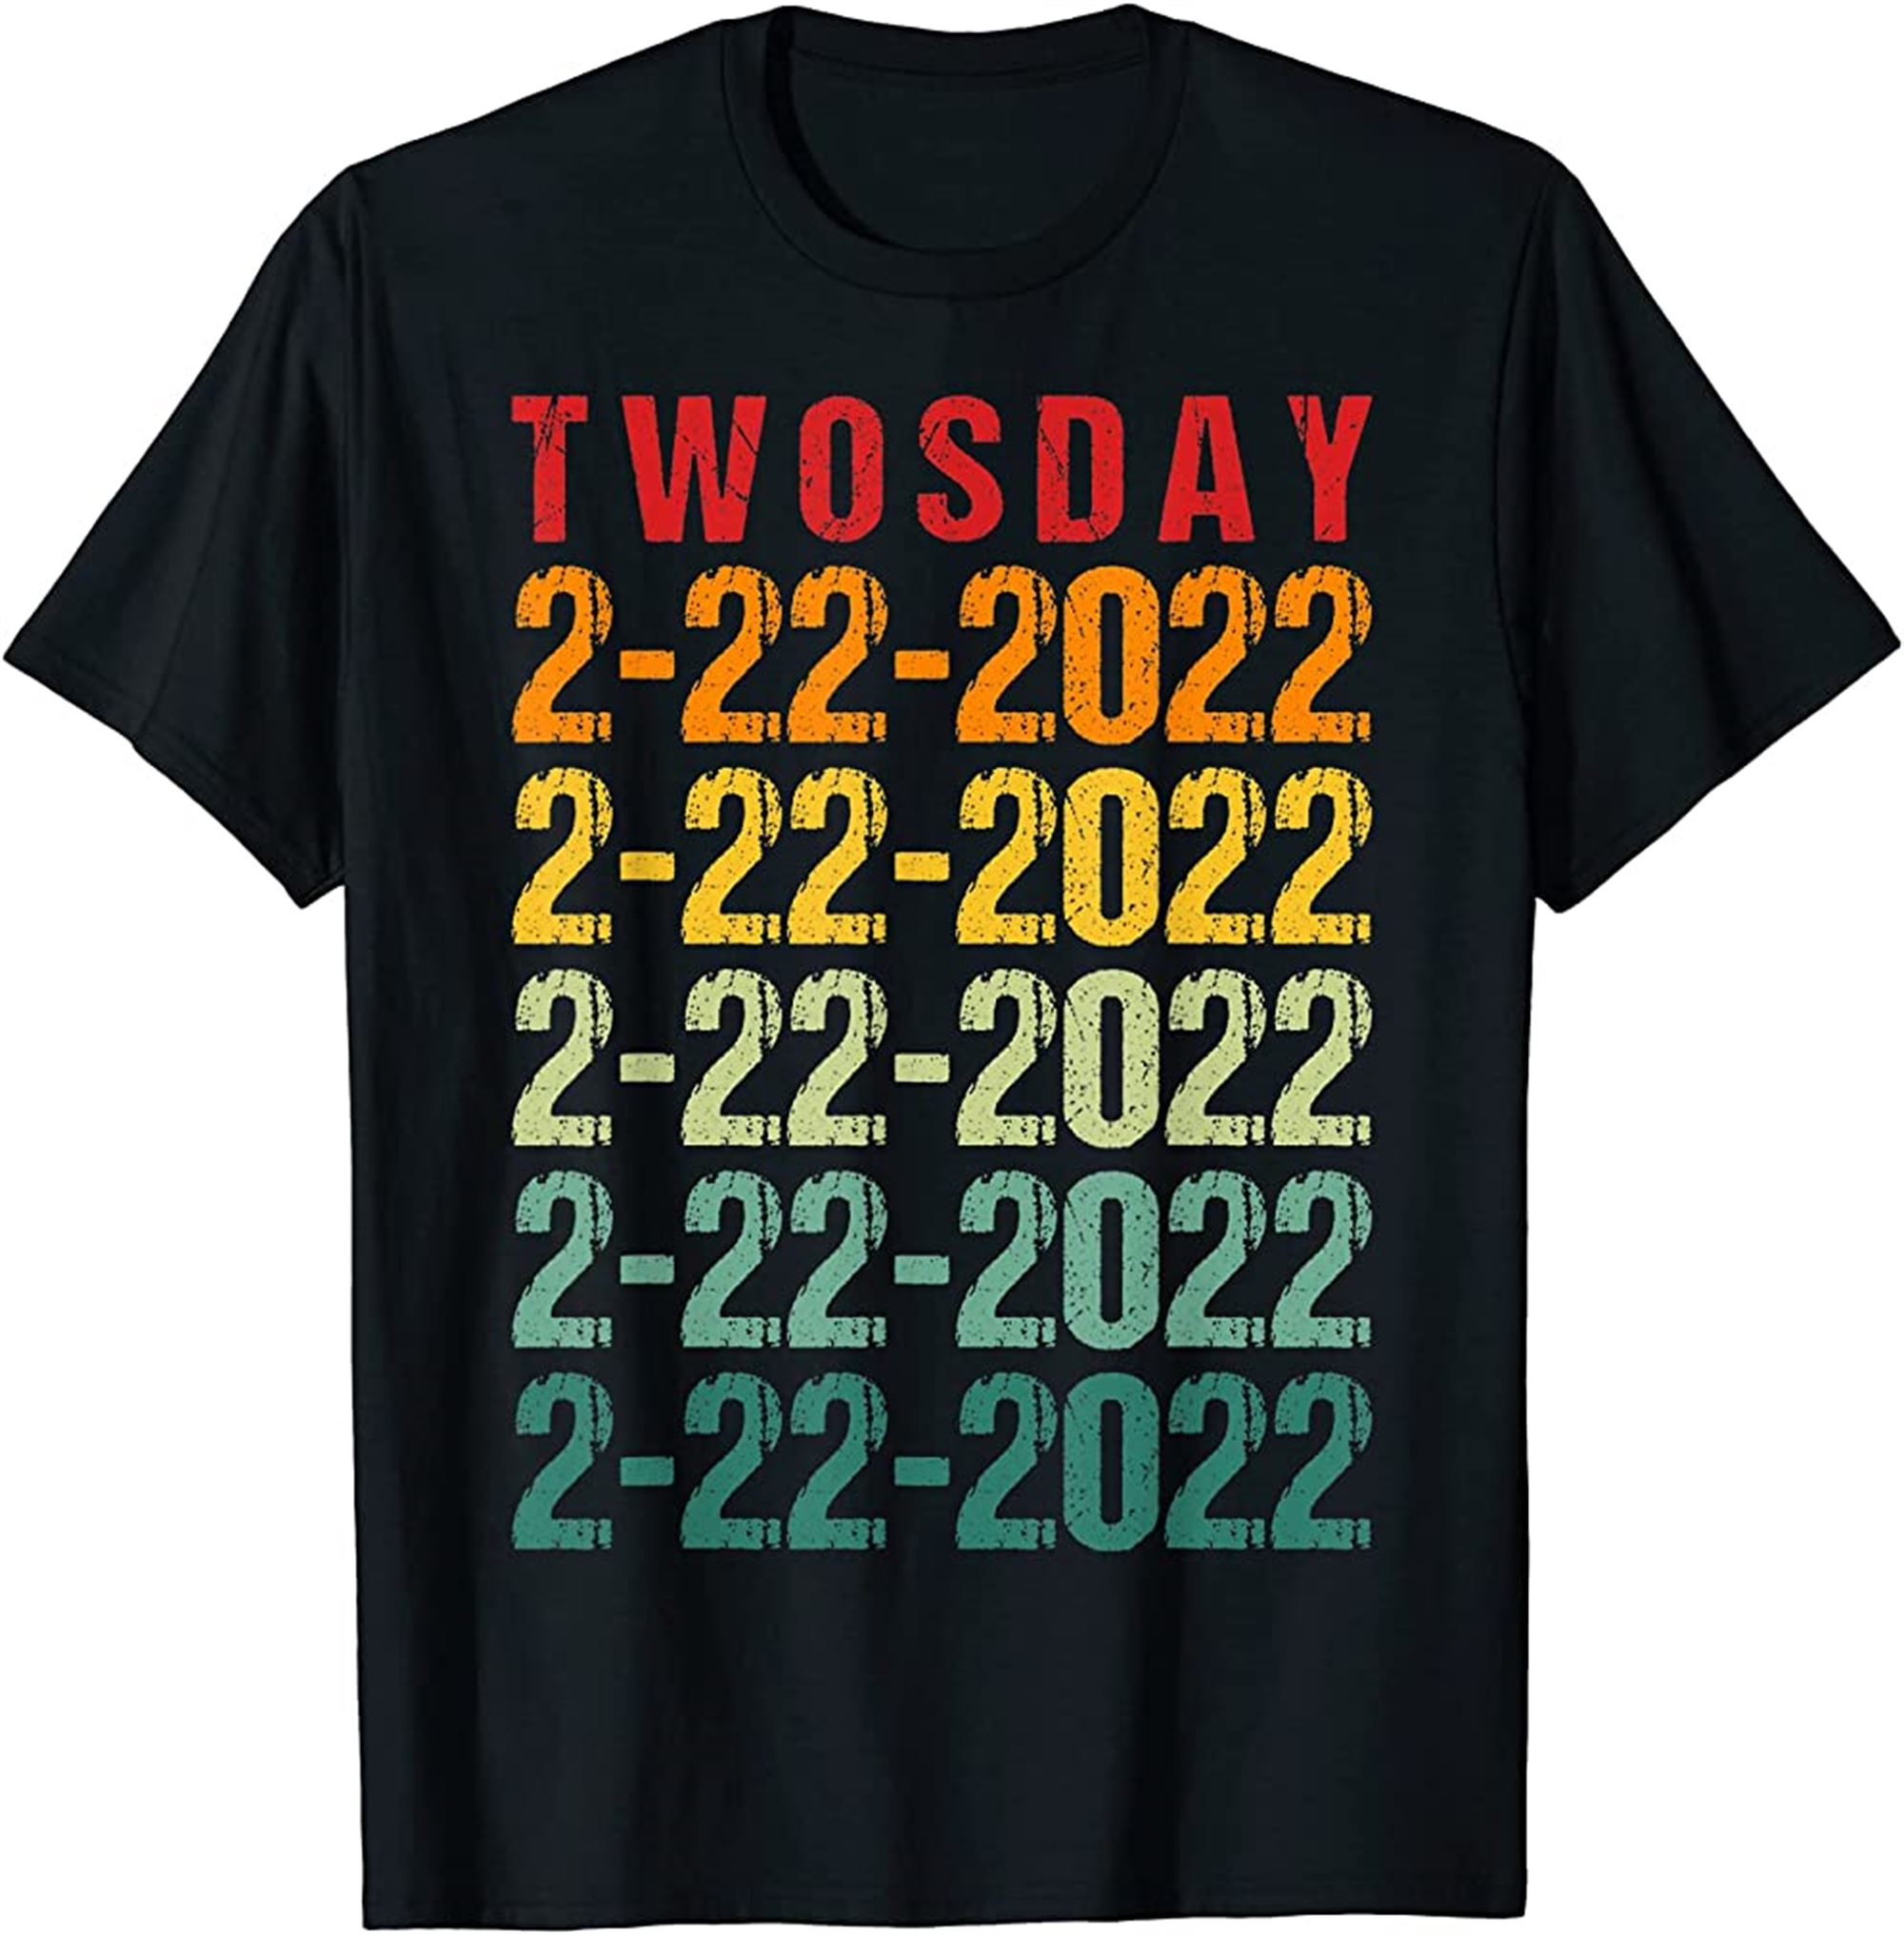 Twosday 02 22 2022 Tuesday February 2nd 2022 Vintage Funny Tshirt Plus Size Up To 5xl